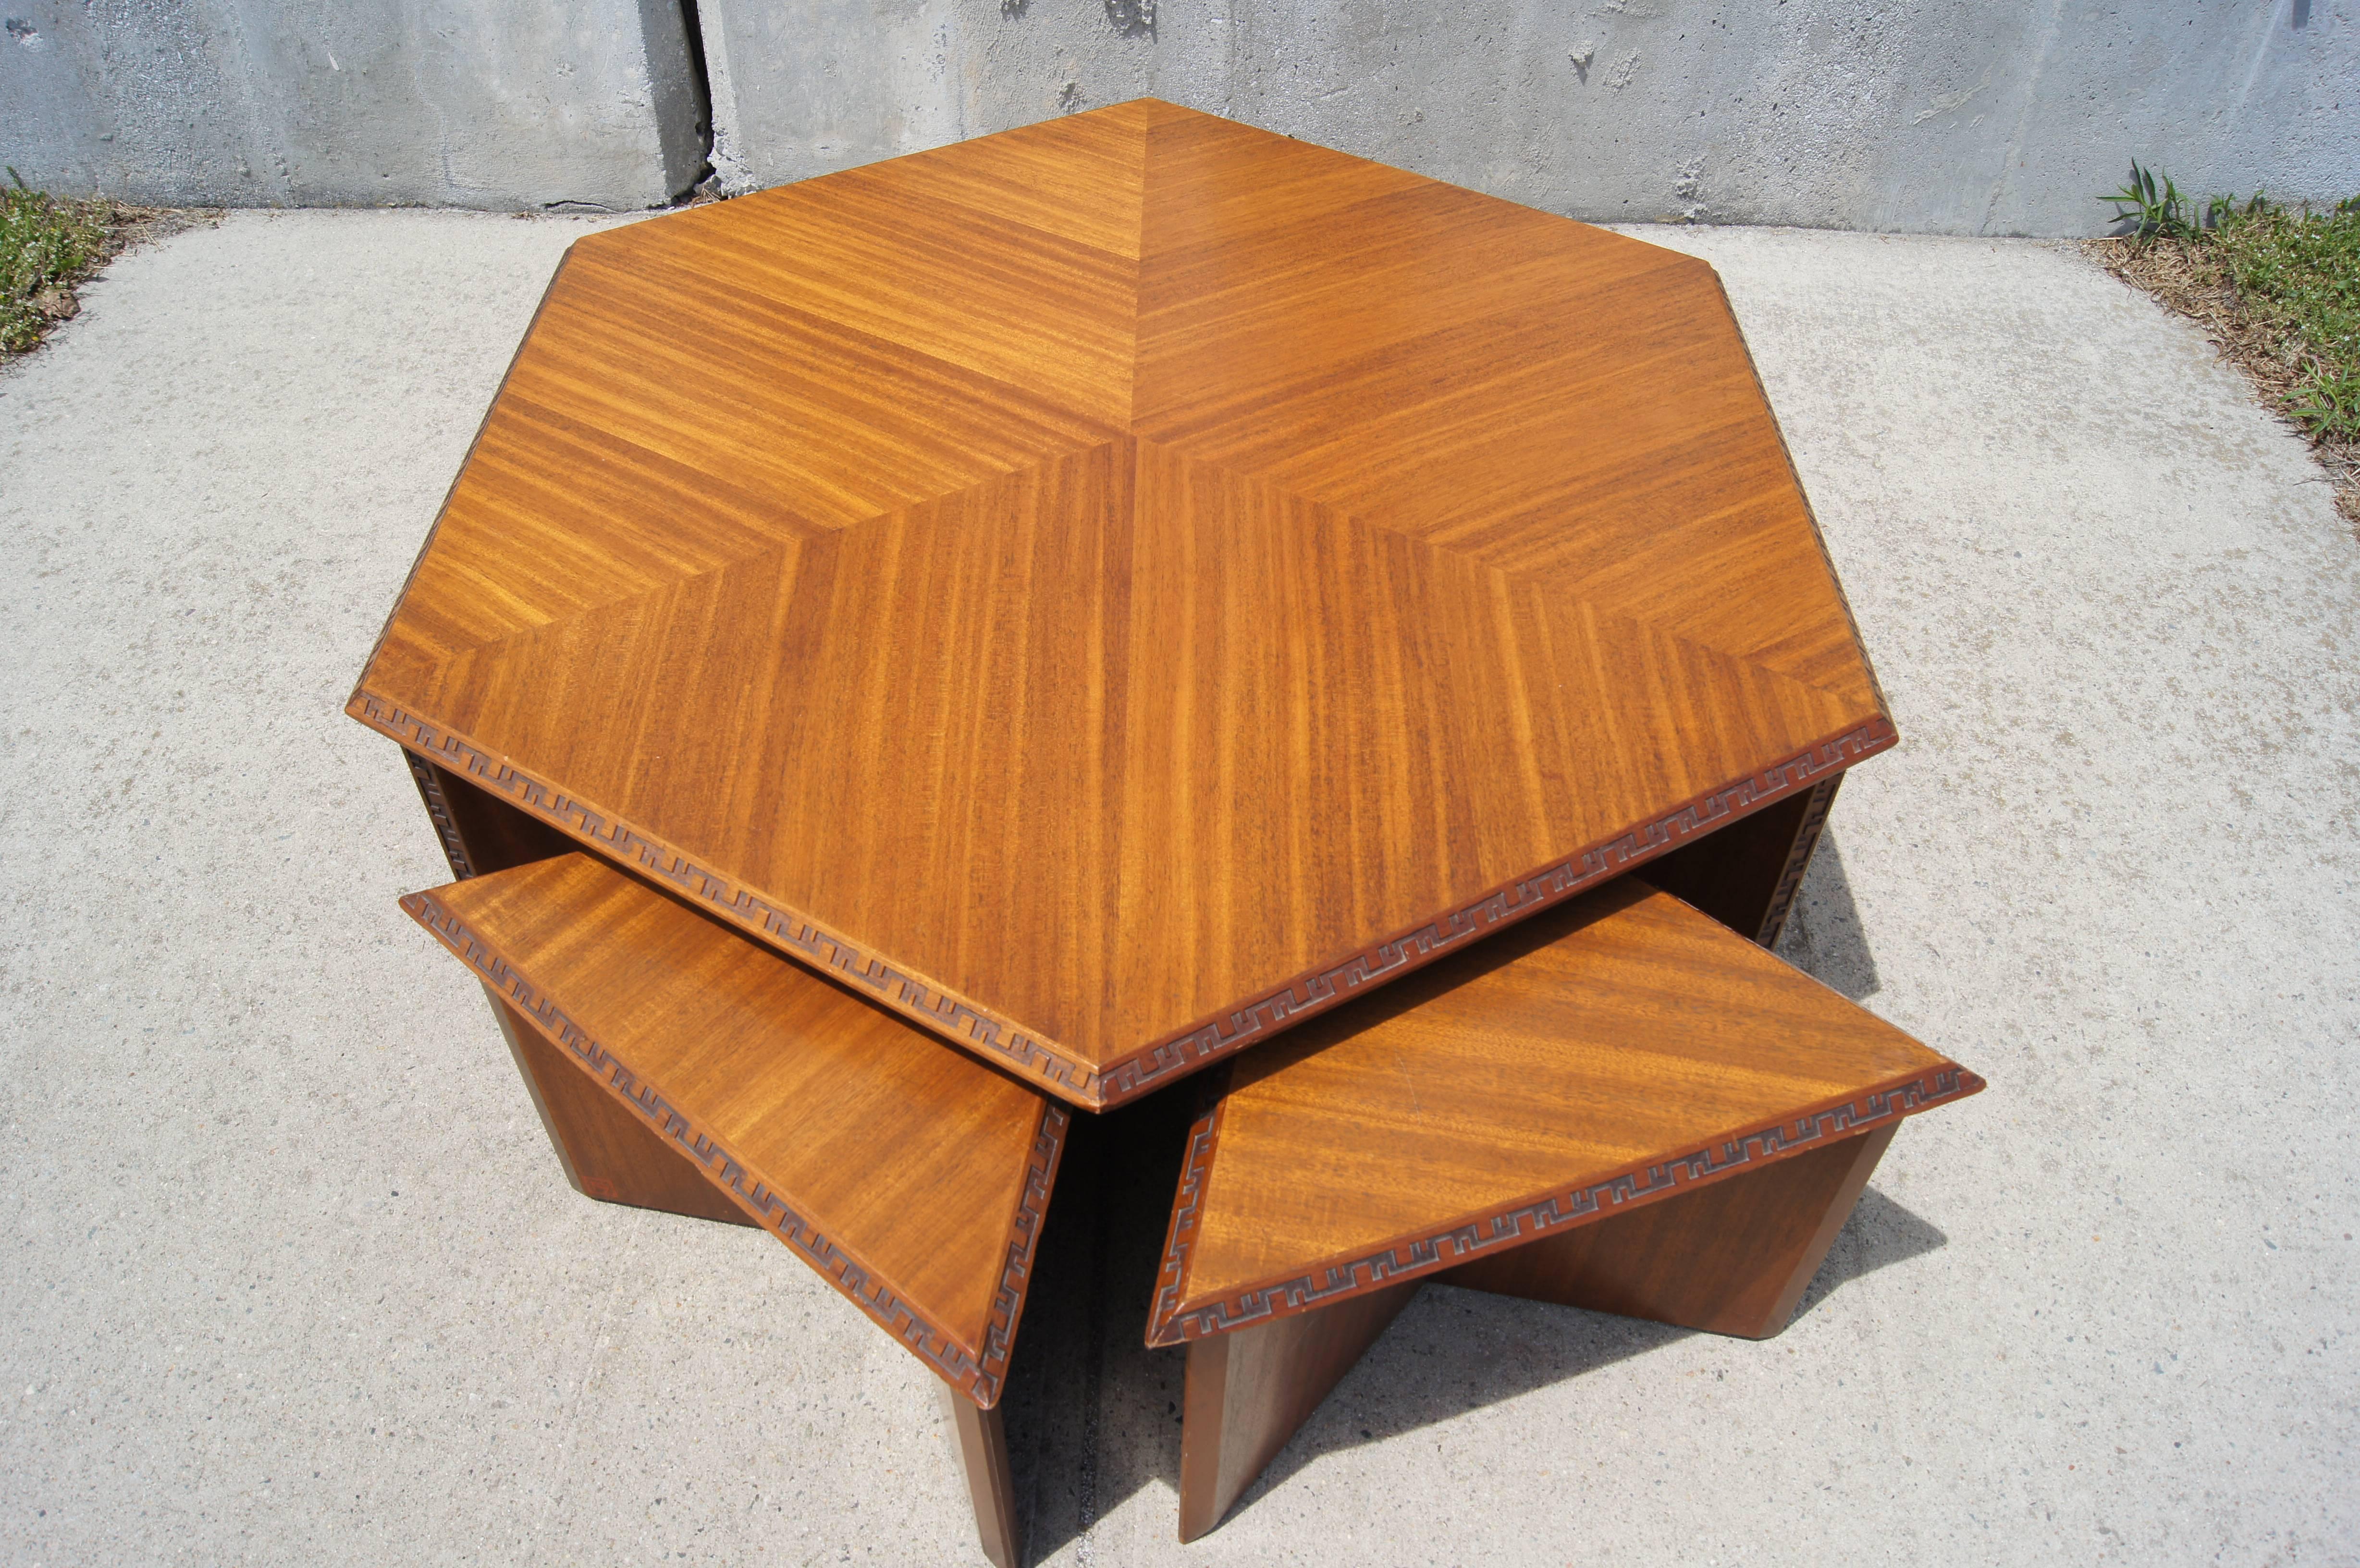 This handsome set is part of the Taliesin collection that Frank Lloyd Wright designed for Henredon in 1955. It comprises a coffee table whose hexagonal top sits on a tripod base and two triangular stools that fit underneath. 

The solid mahogany